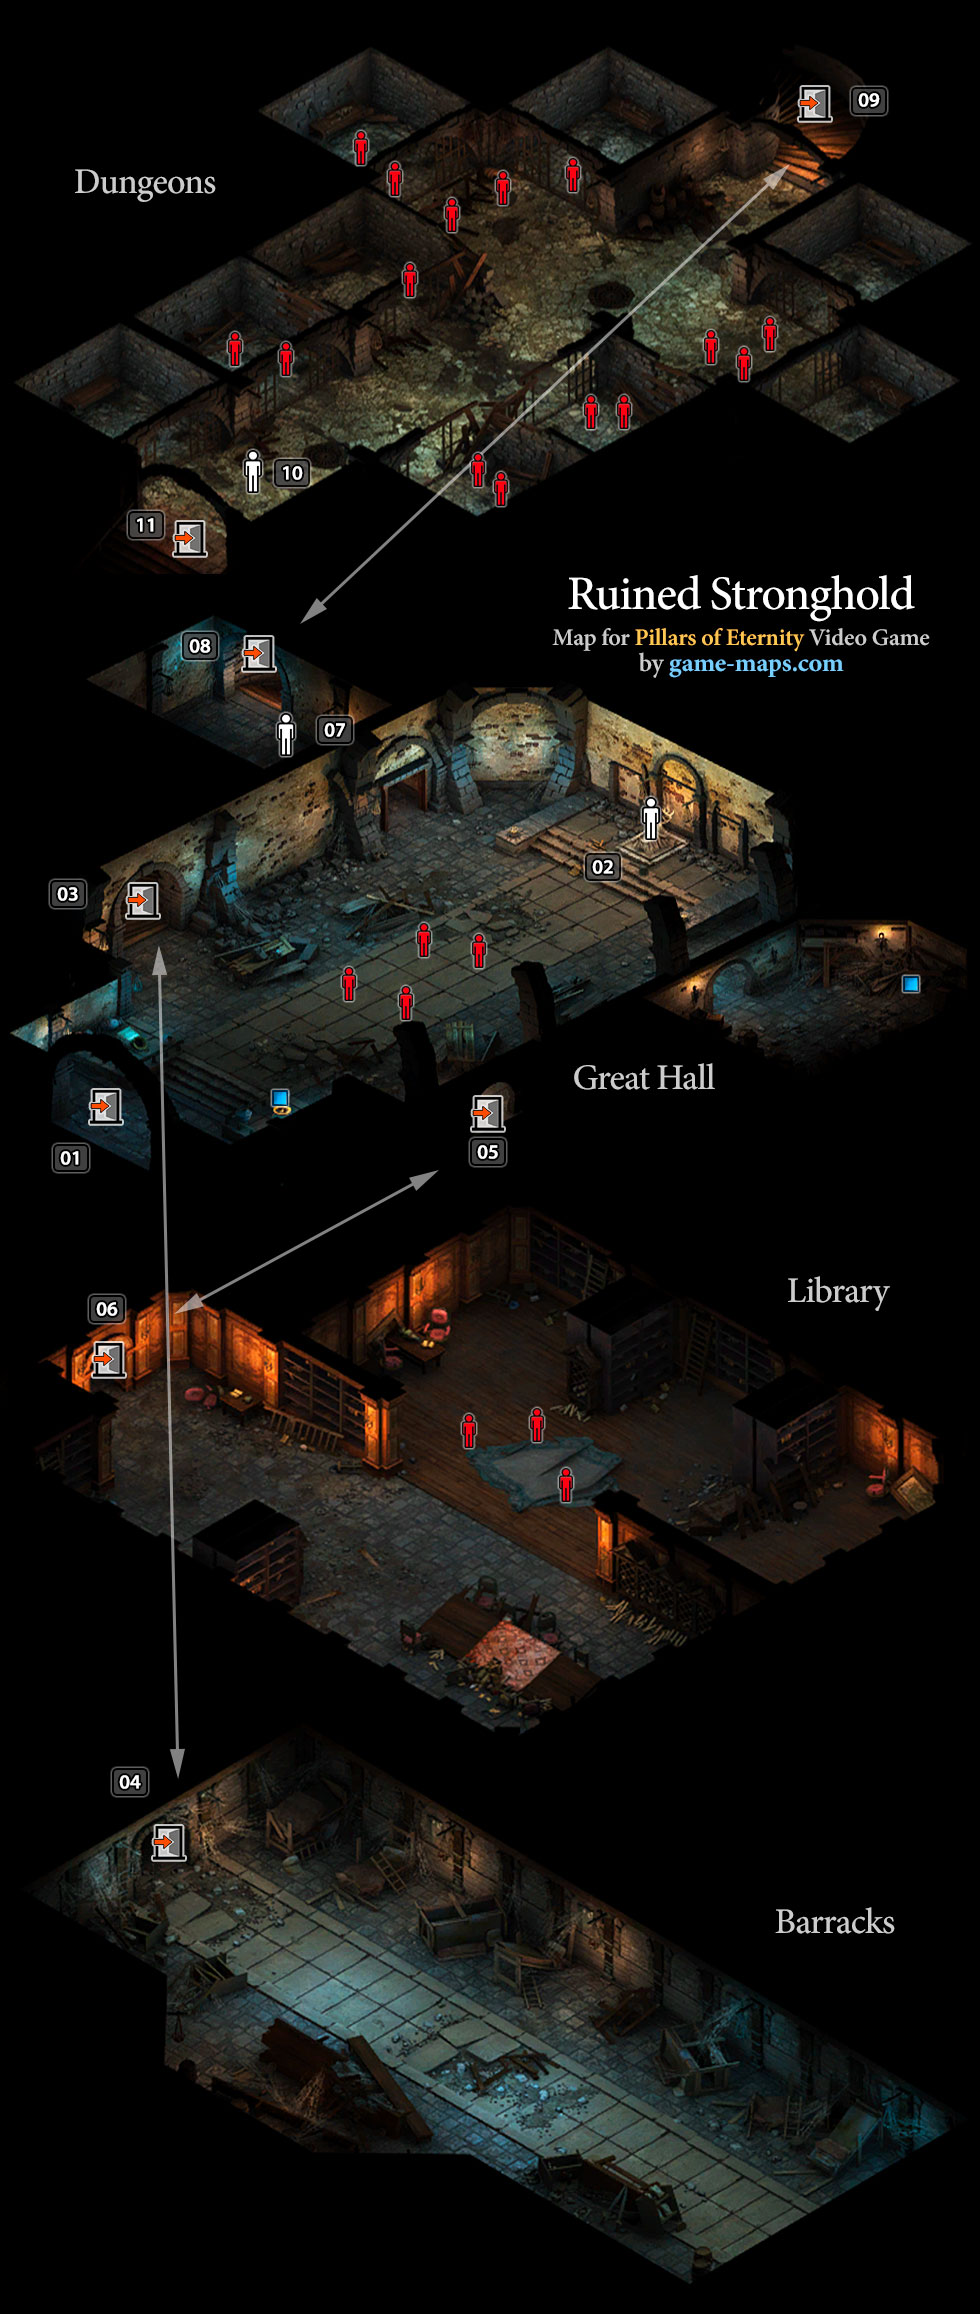 Ruined Stronghold Map - Pillars of Eternity